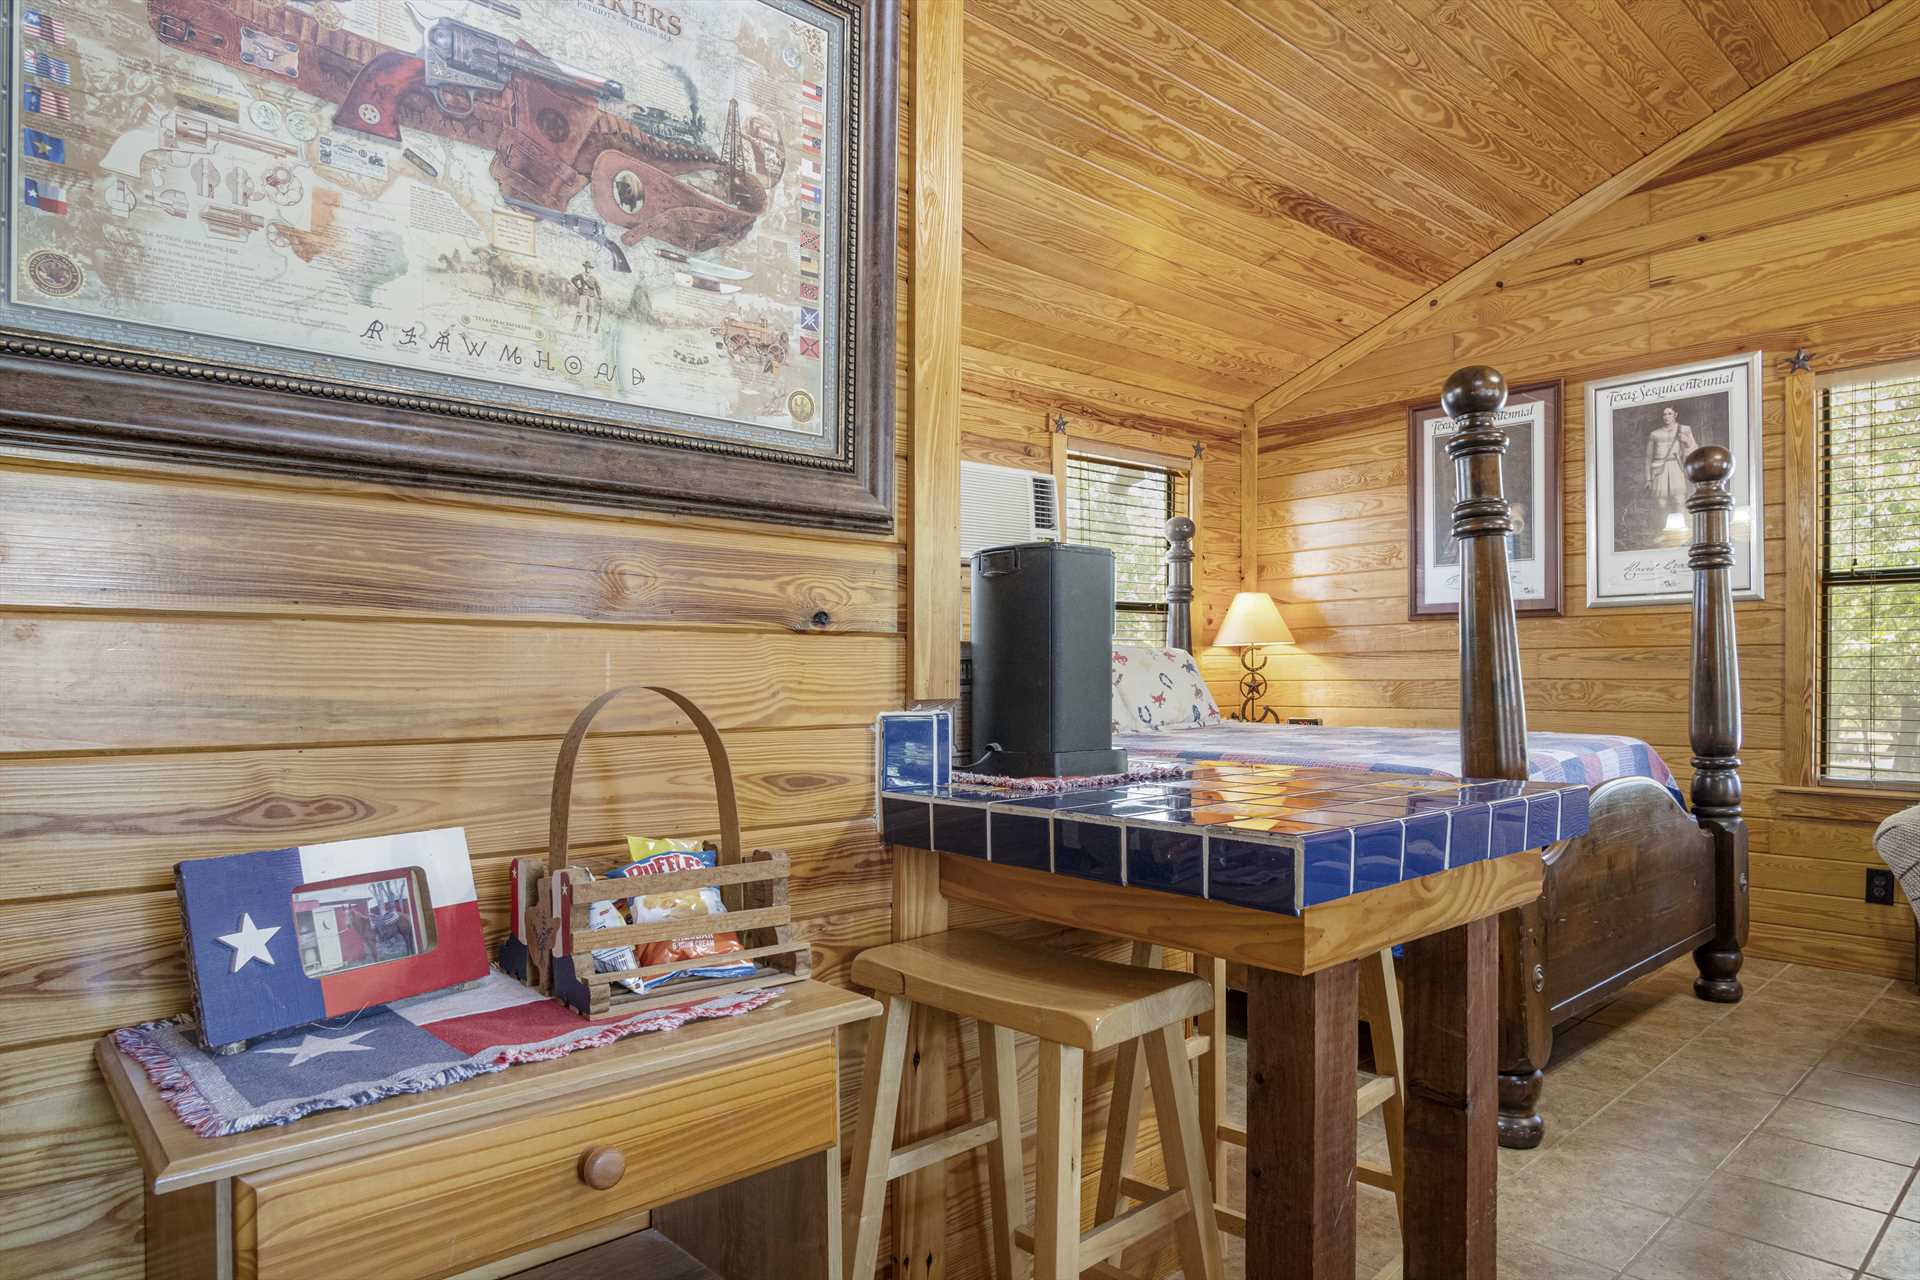                                                 The warm and friendly decor of the cabin creates not only a comfortable environment, but one that celebrates the Lone Star State!